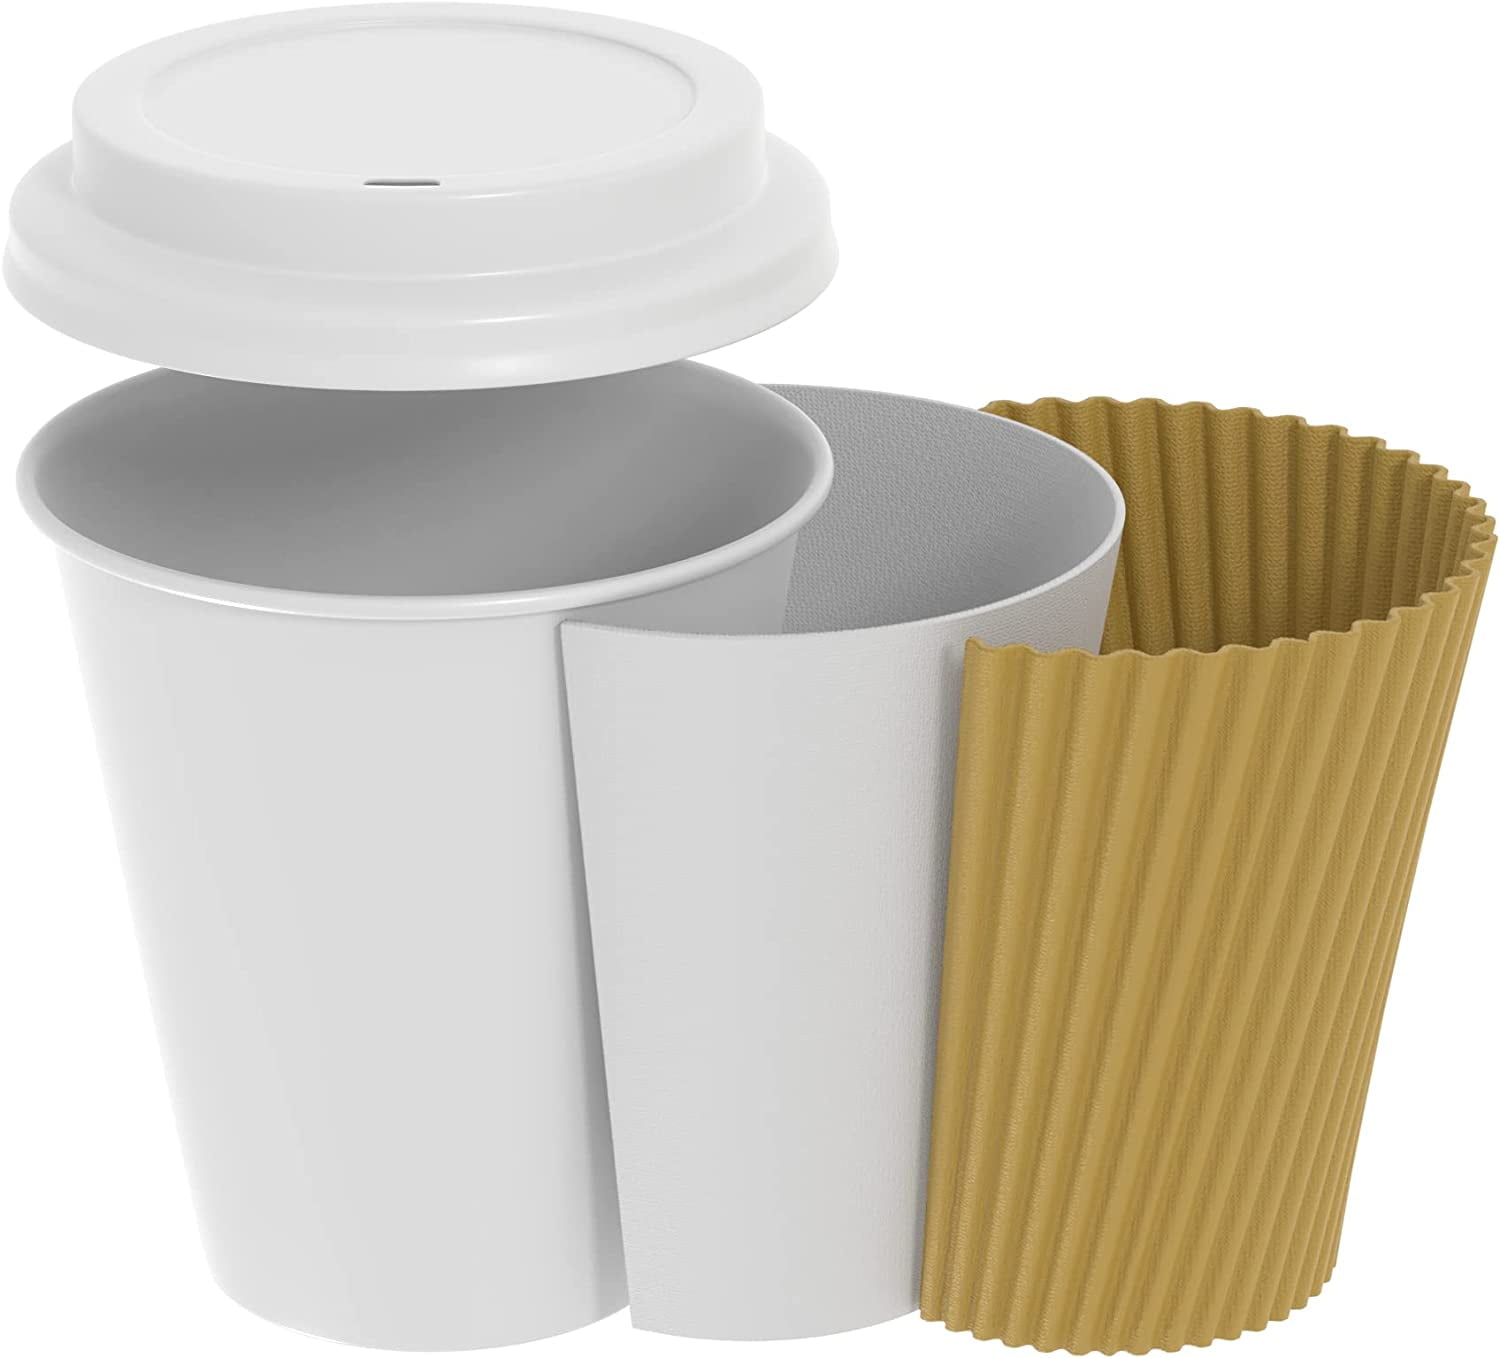 Sheffield Home Disposable Coffee Cups with Lids 16 oz, Cute Disposable Cups  with Lids 12 Pack with Sleeves